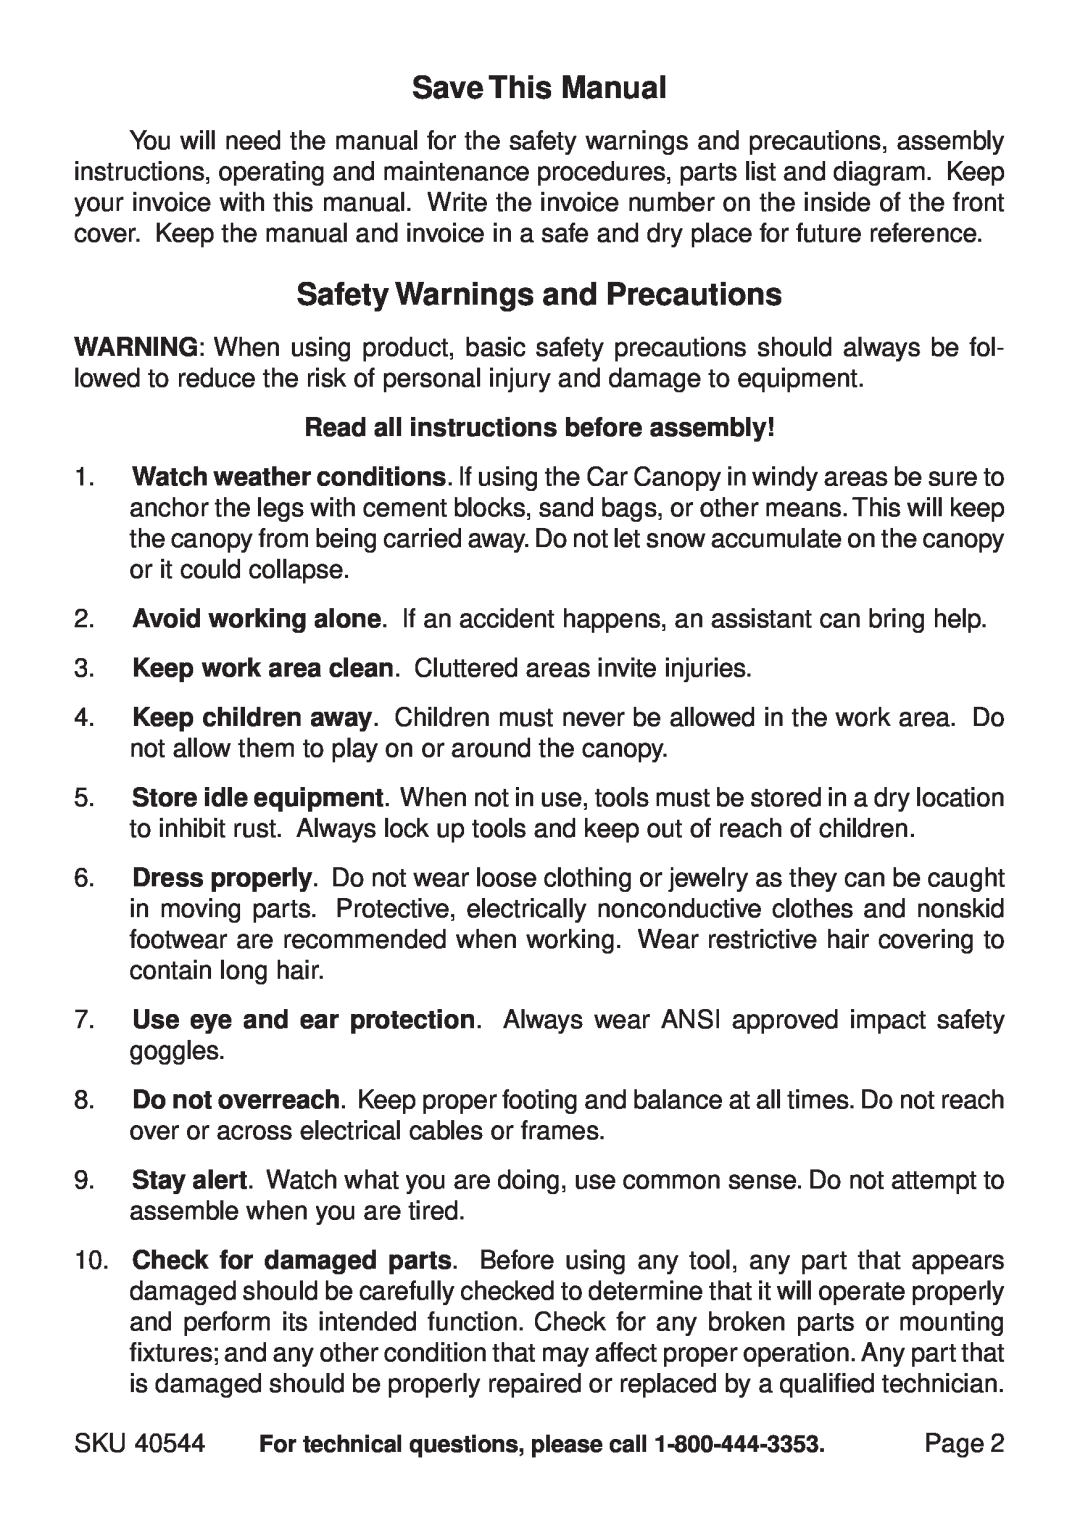 Harbor Freight Tools 40544 Save This Manual, Safety Warnings and Precautions, Read all instructions before assembly, Page 